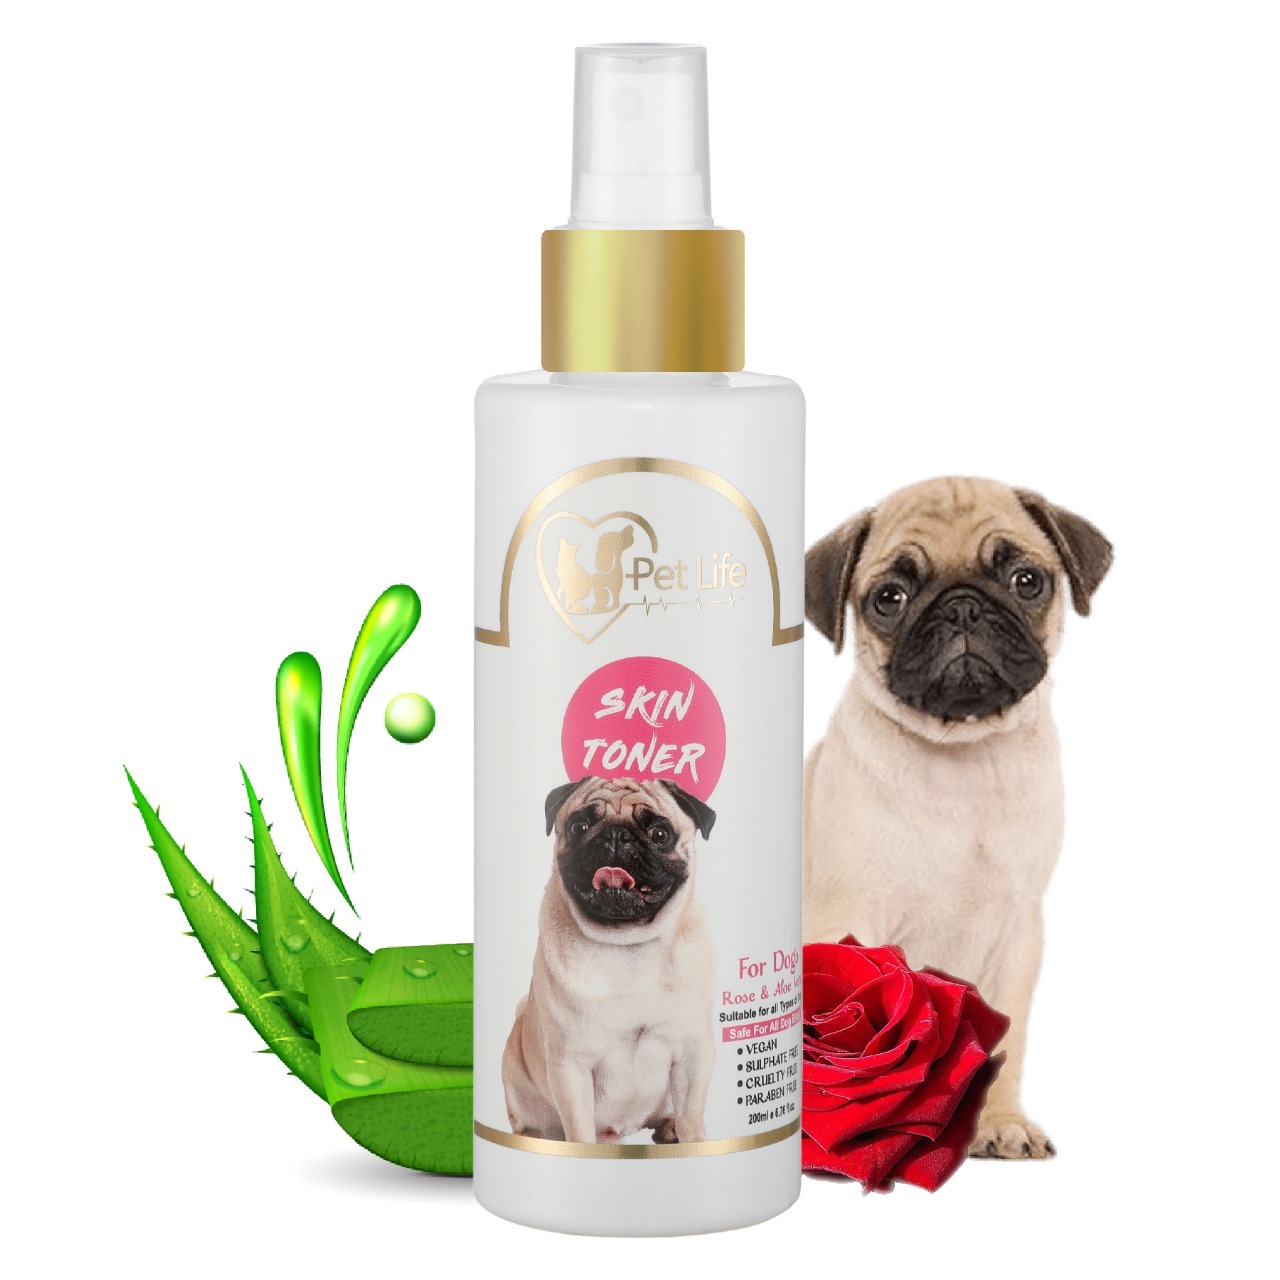 Pet Life Pure Organic Skin Toner Spray Help to minimize Allergy, Redness, Itchiness, Fungal Infection, Restores Skin Health & Moisture for All Cat Breed